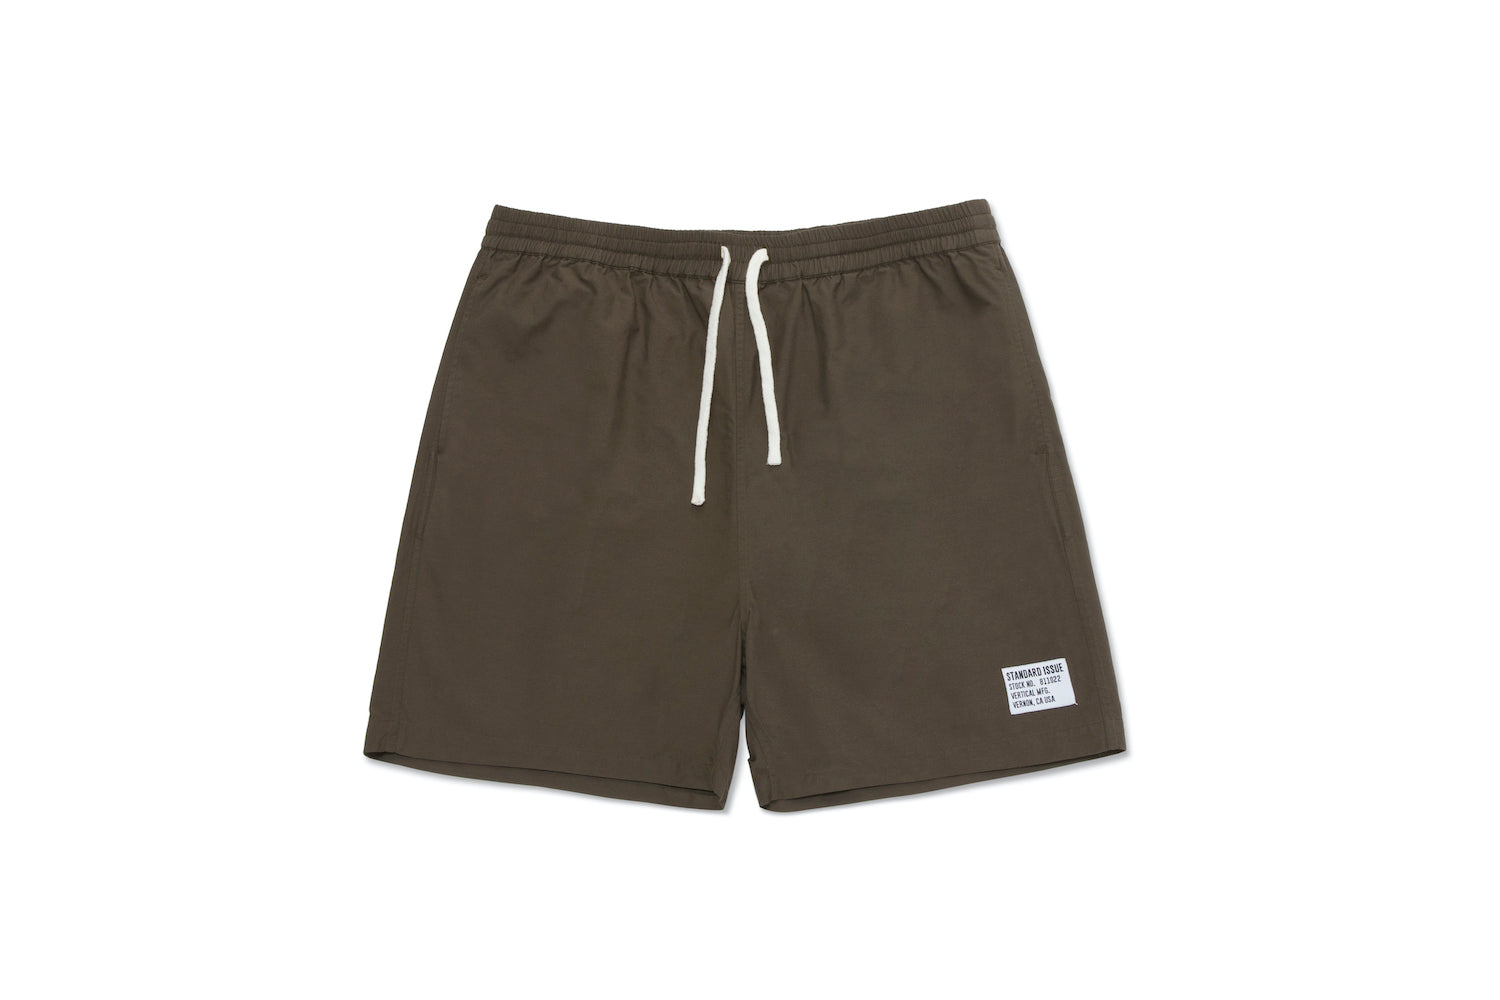 PT Shorts Bungee Cord